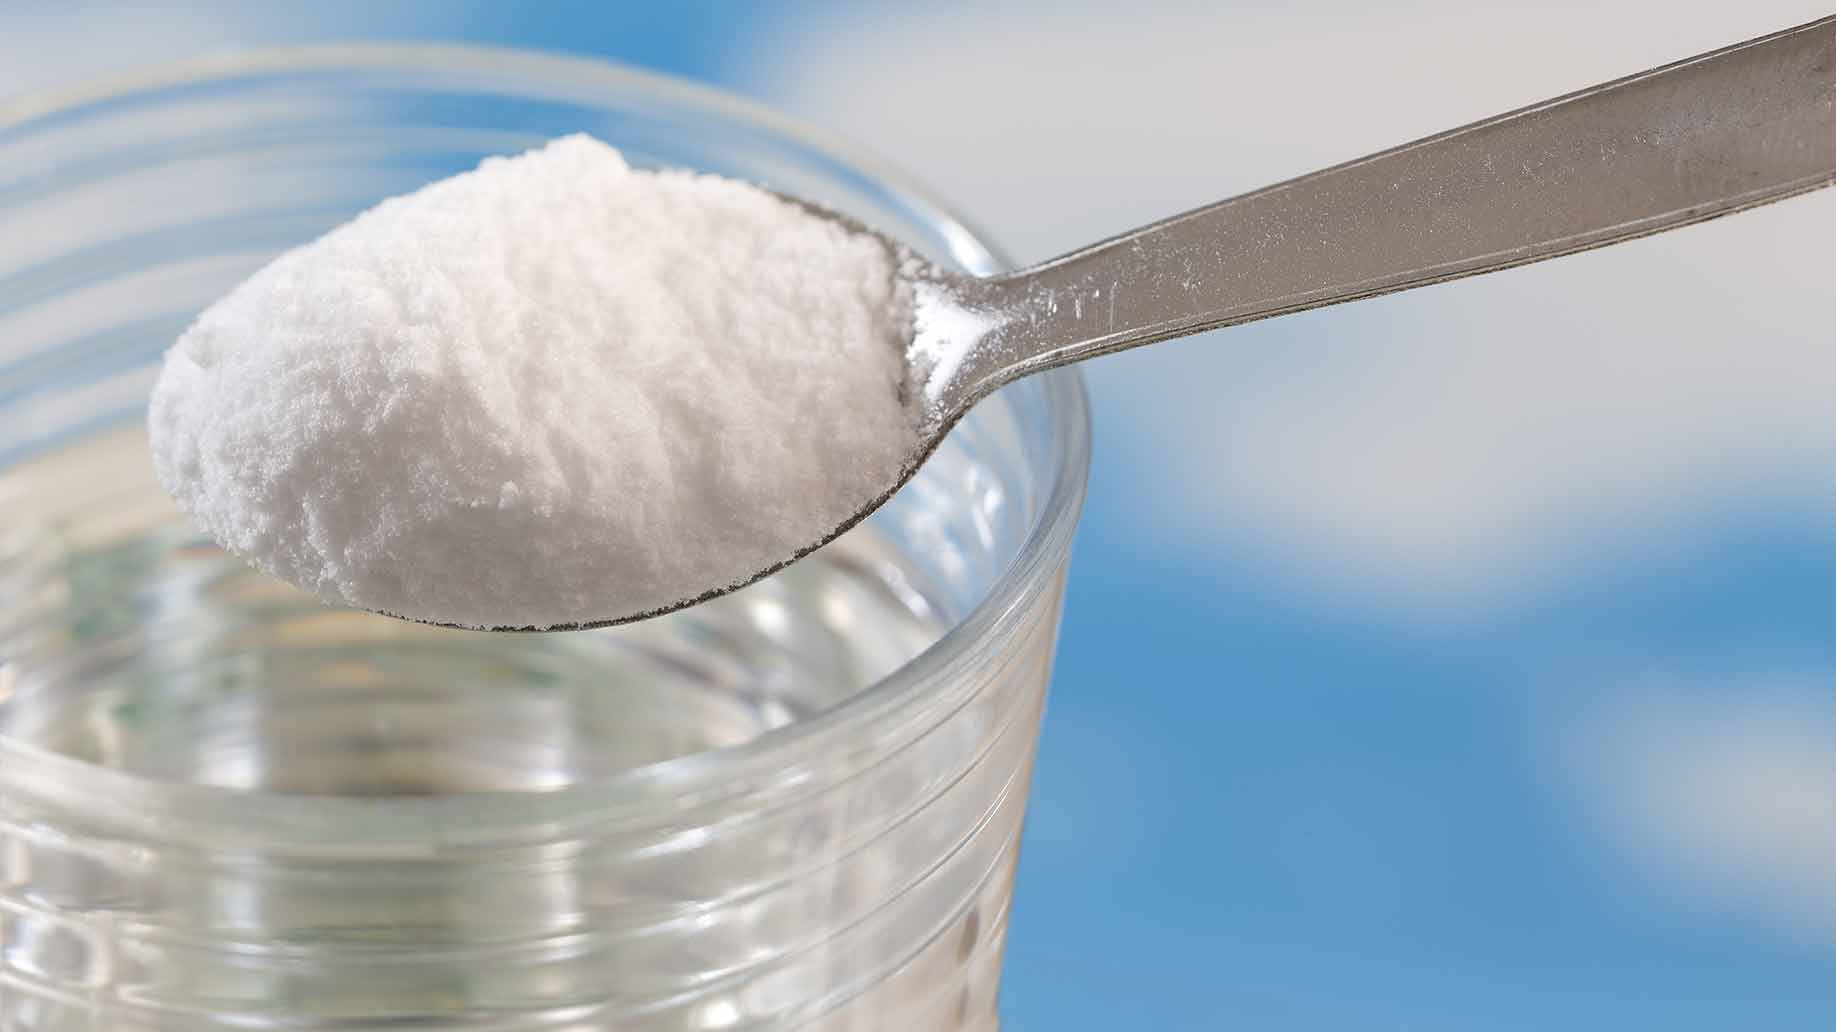 Soda Ash Market: Growing Demand and Emerging Opportunities